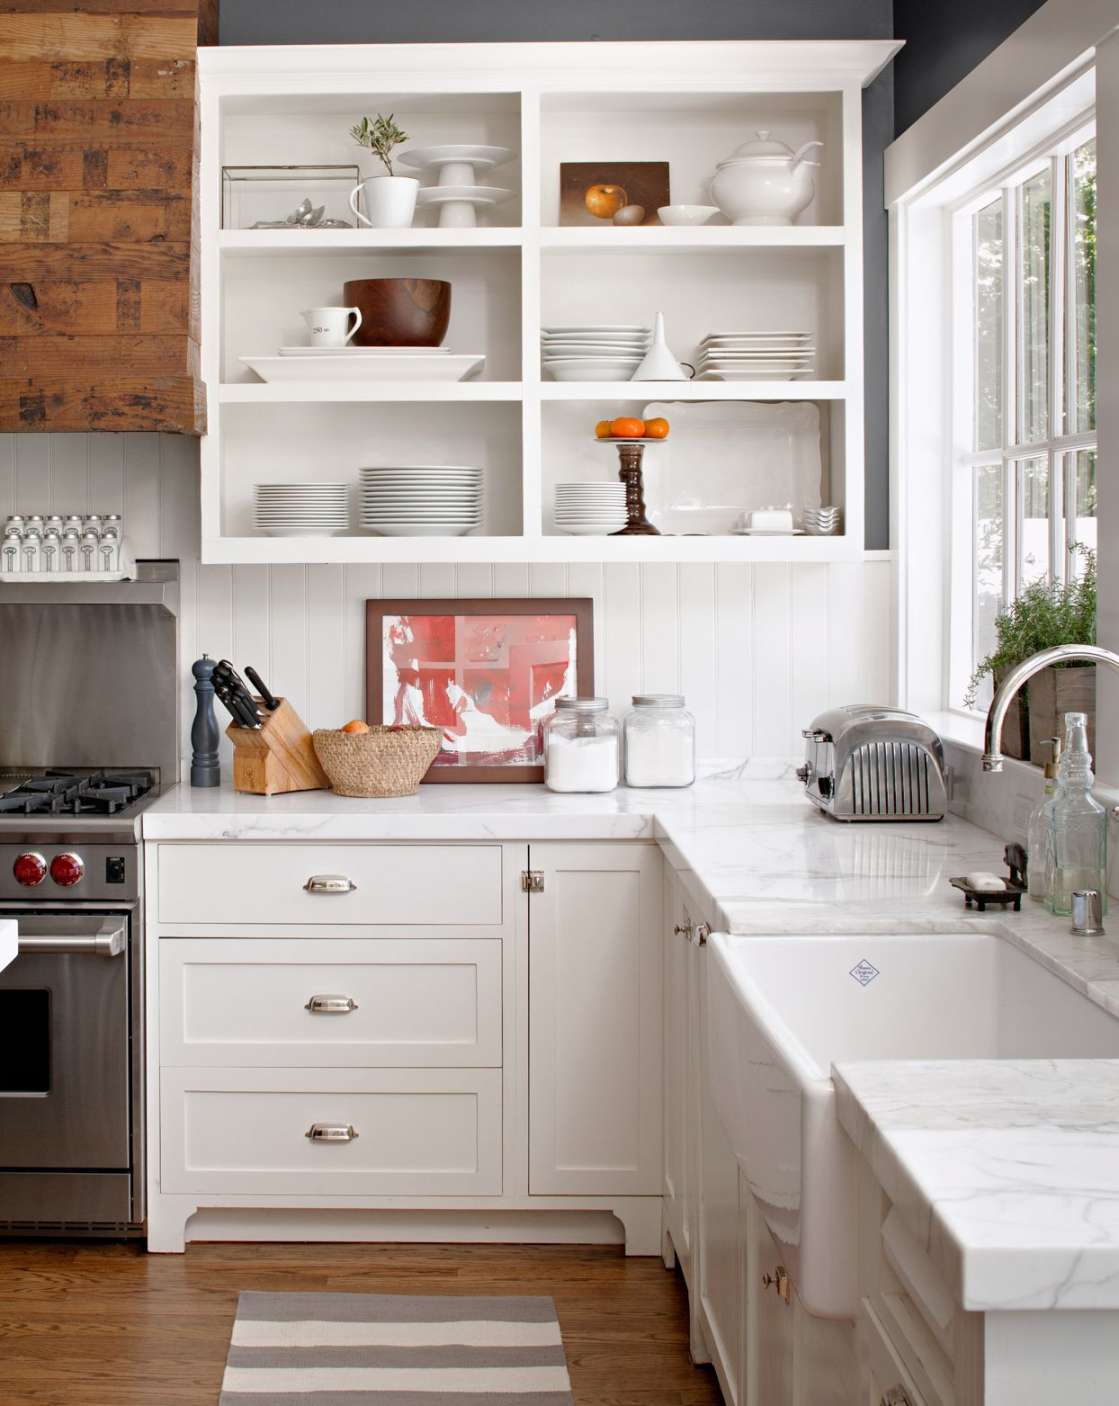 How to Remove Cabinet Doors for Open Shelving Storage in Your Kitchen